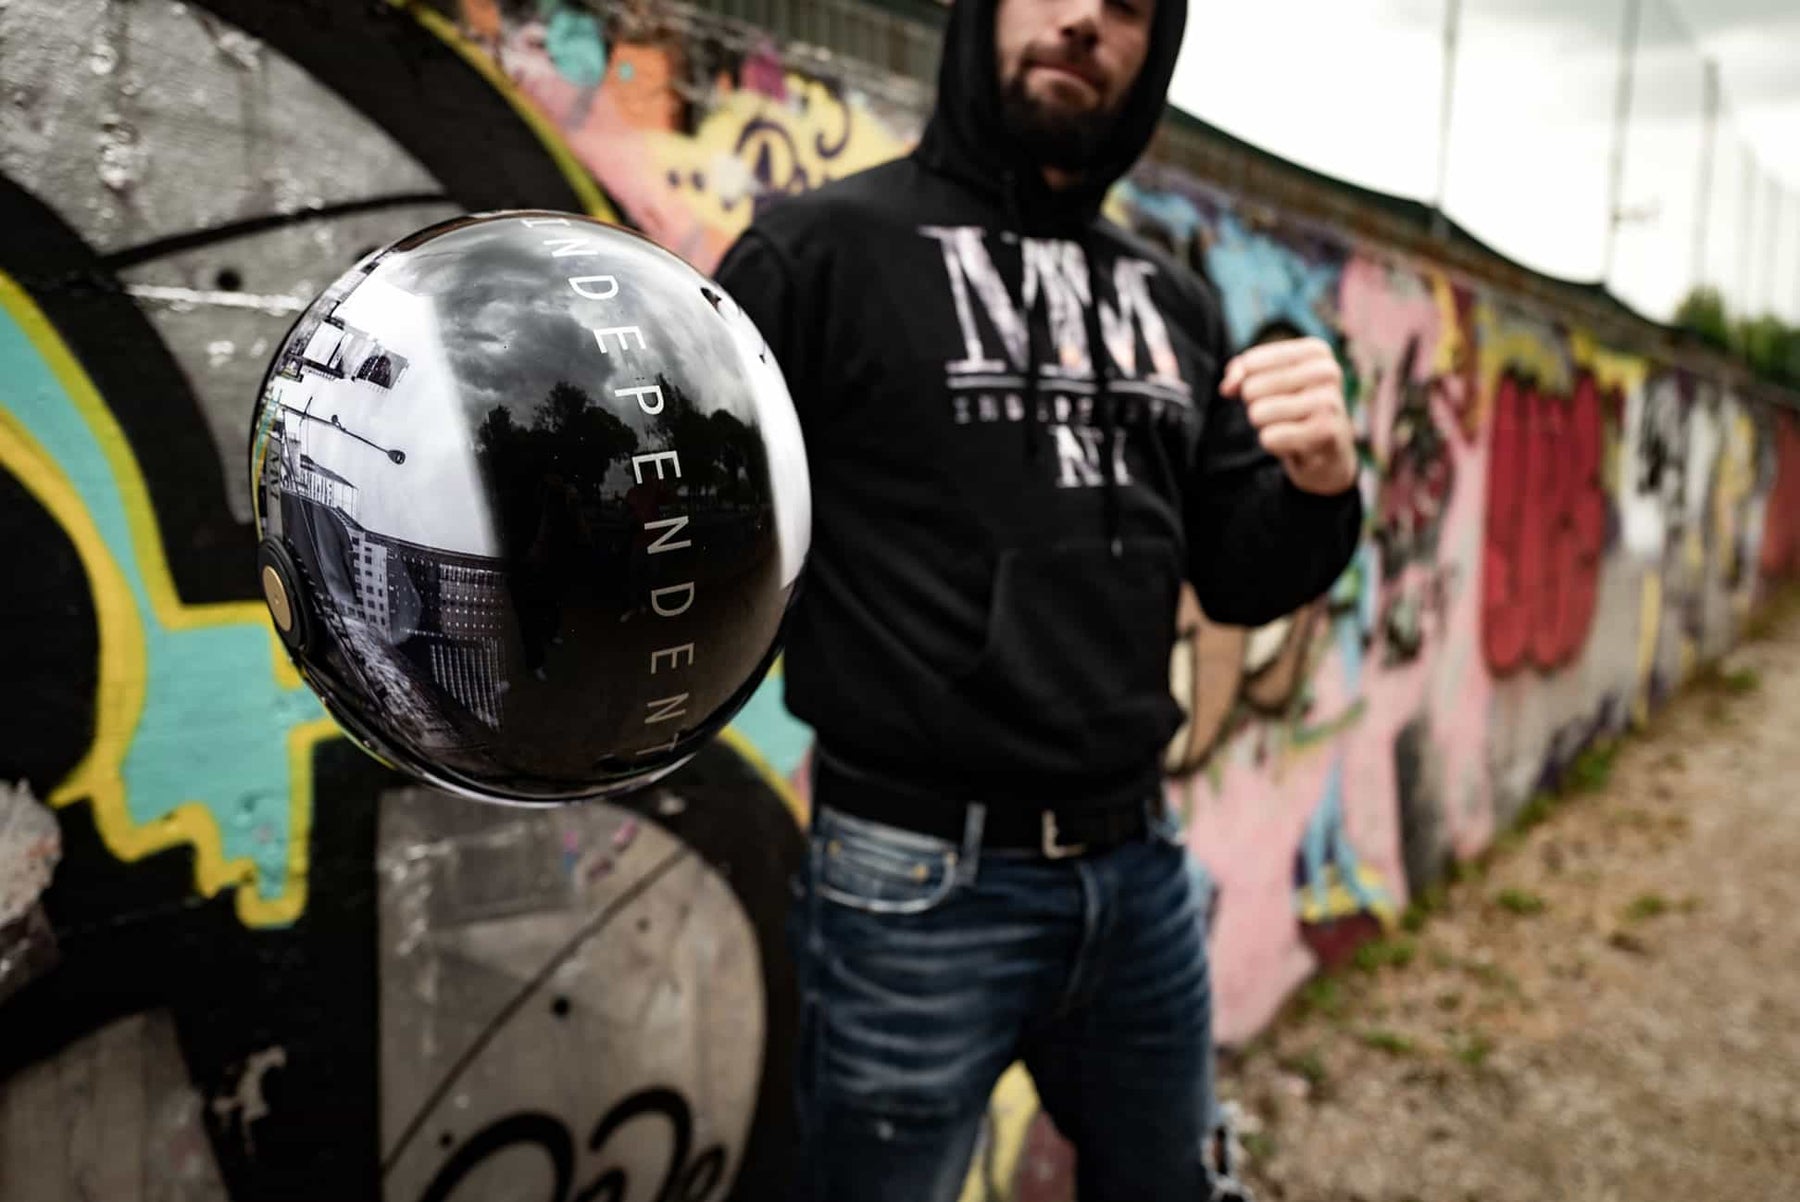 model wearing the mm independent branded sweatshirt holding the matching helmet